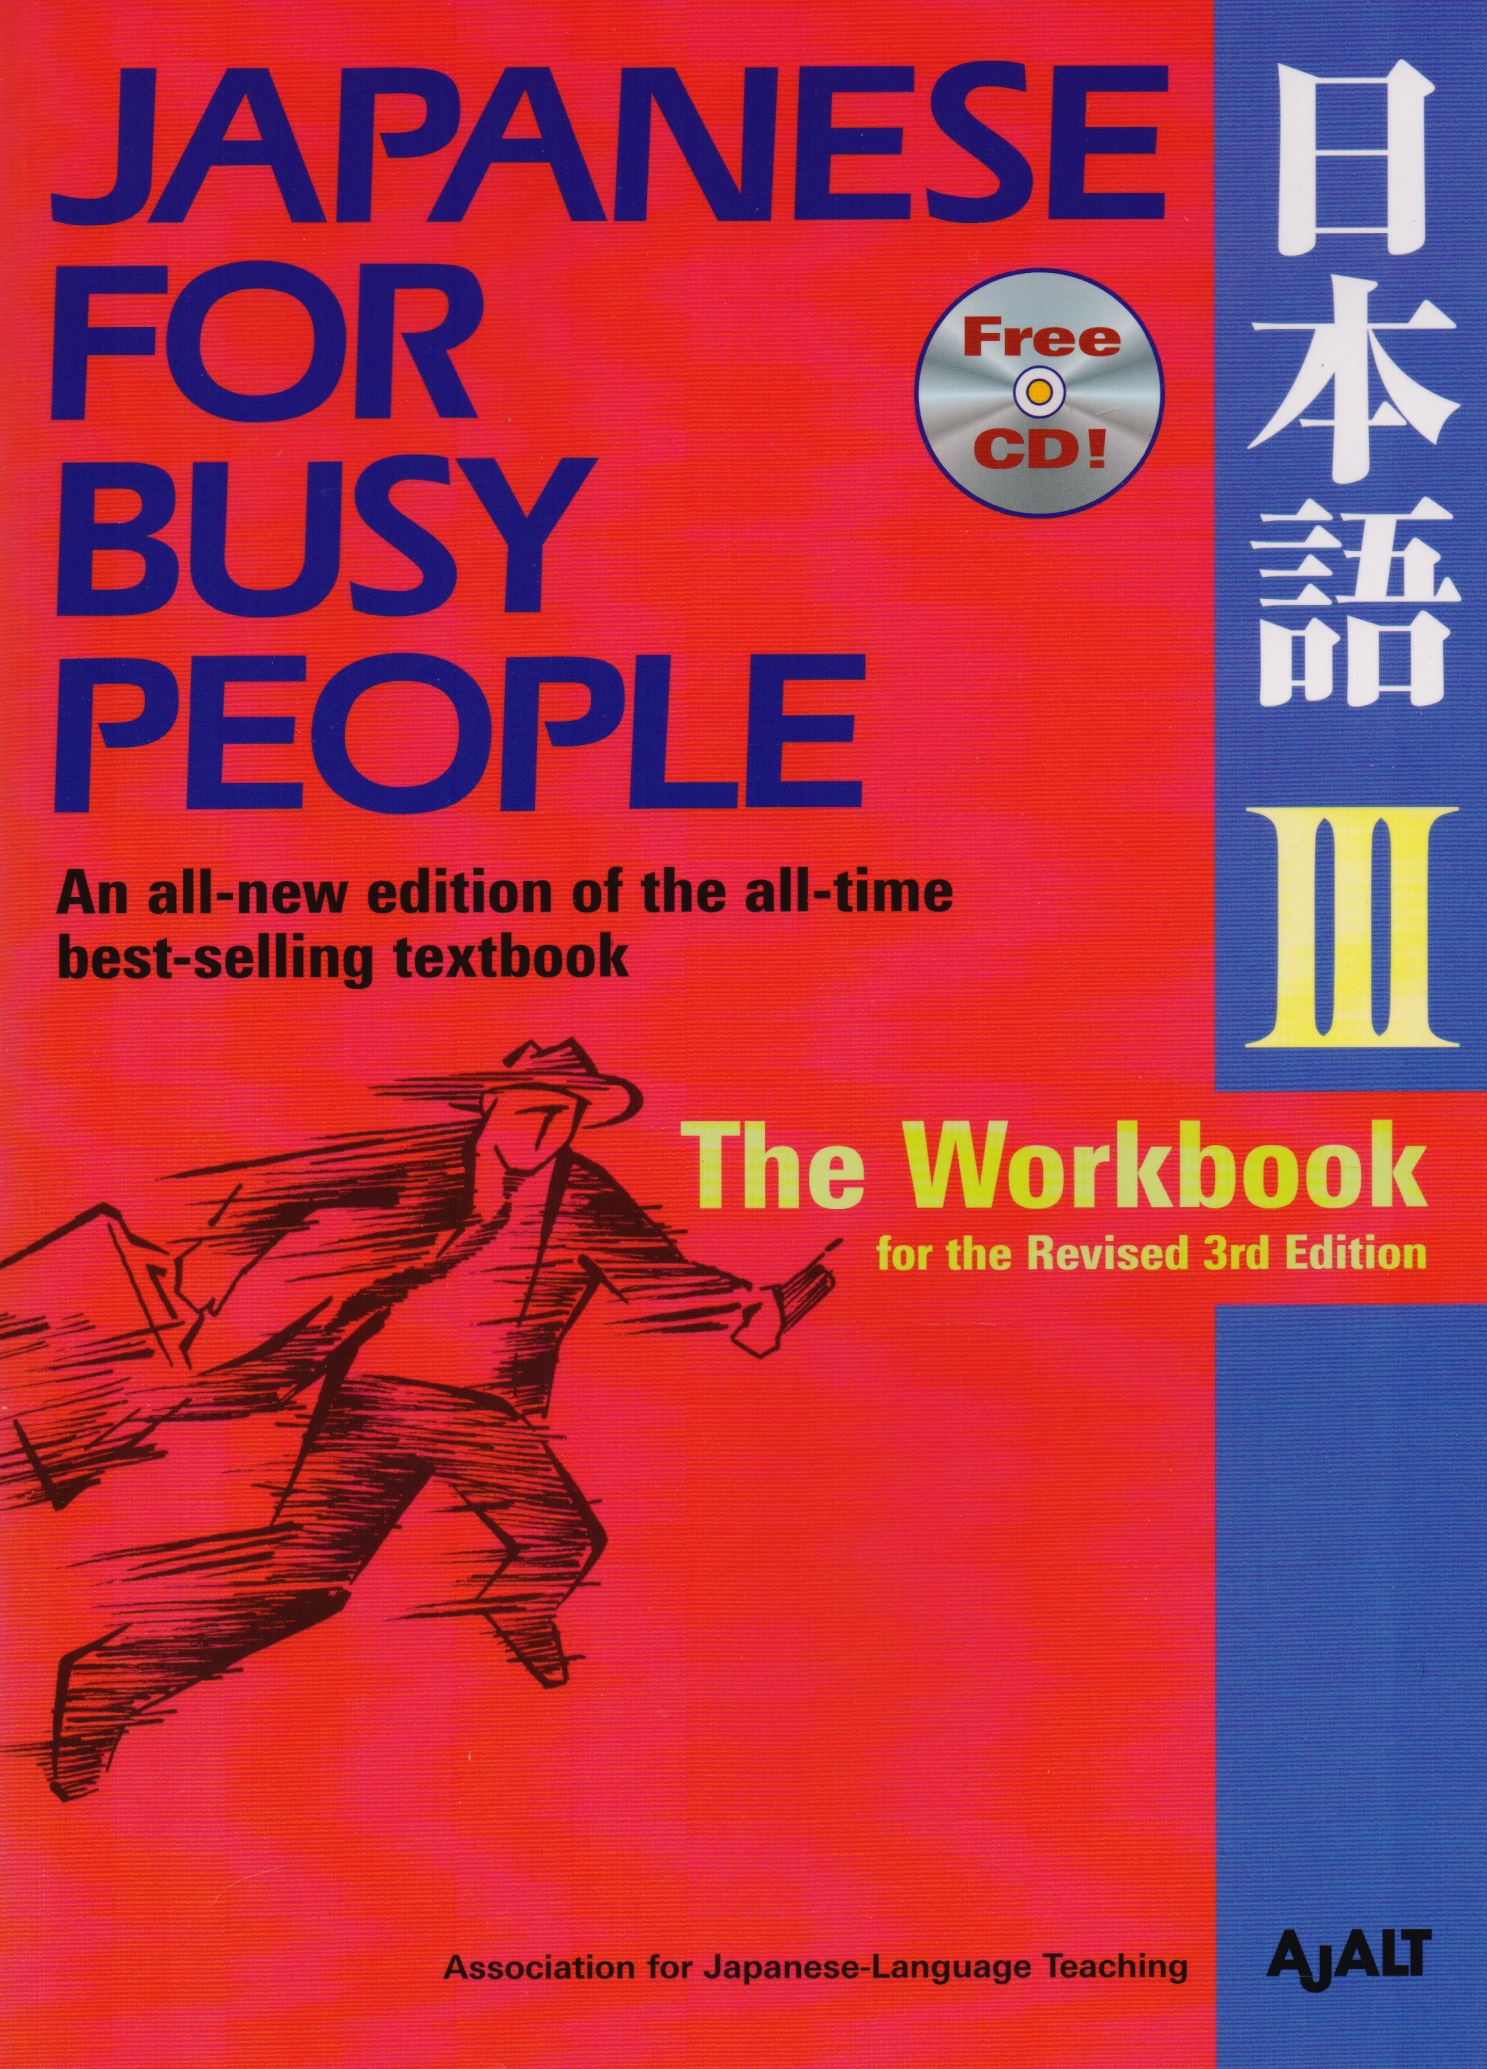 AJALT Japanese for Busy People III: The Workbook for the Revised 3rd Edition (+CD)